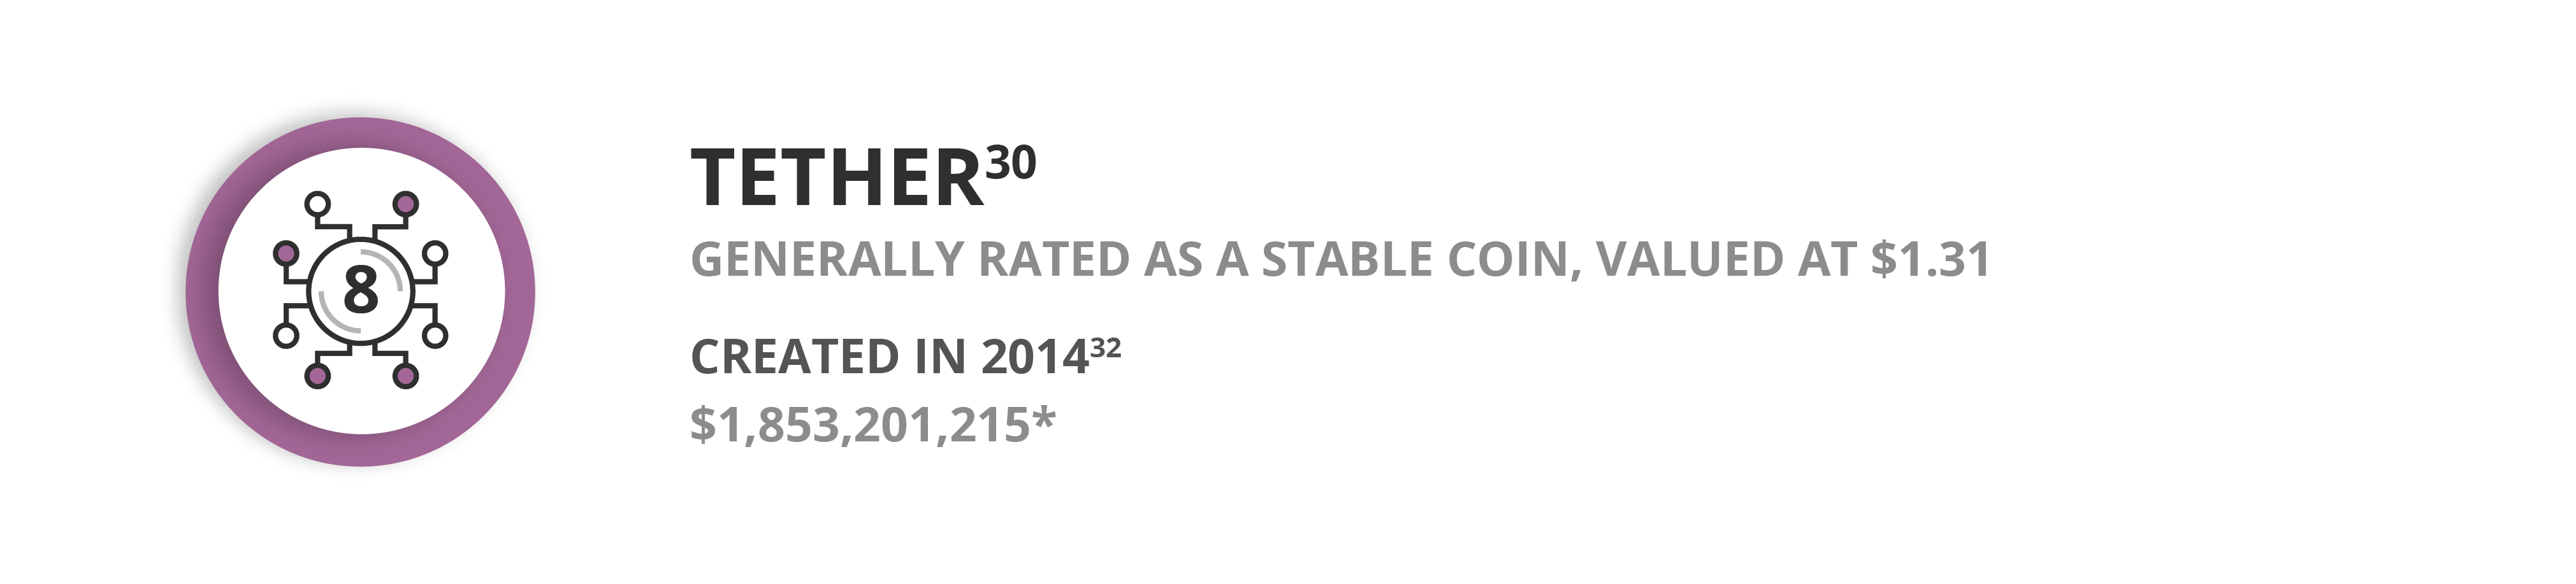 Tether - Generally rated as a stable cryptocurrency. Valued at approx. $1.31